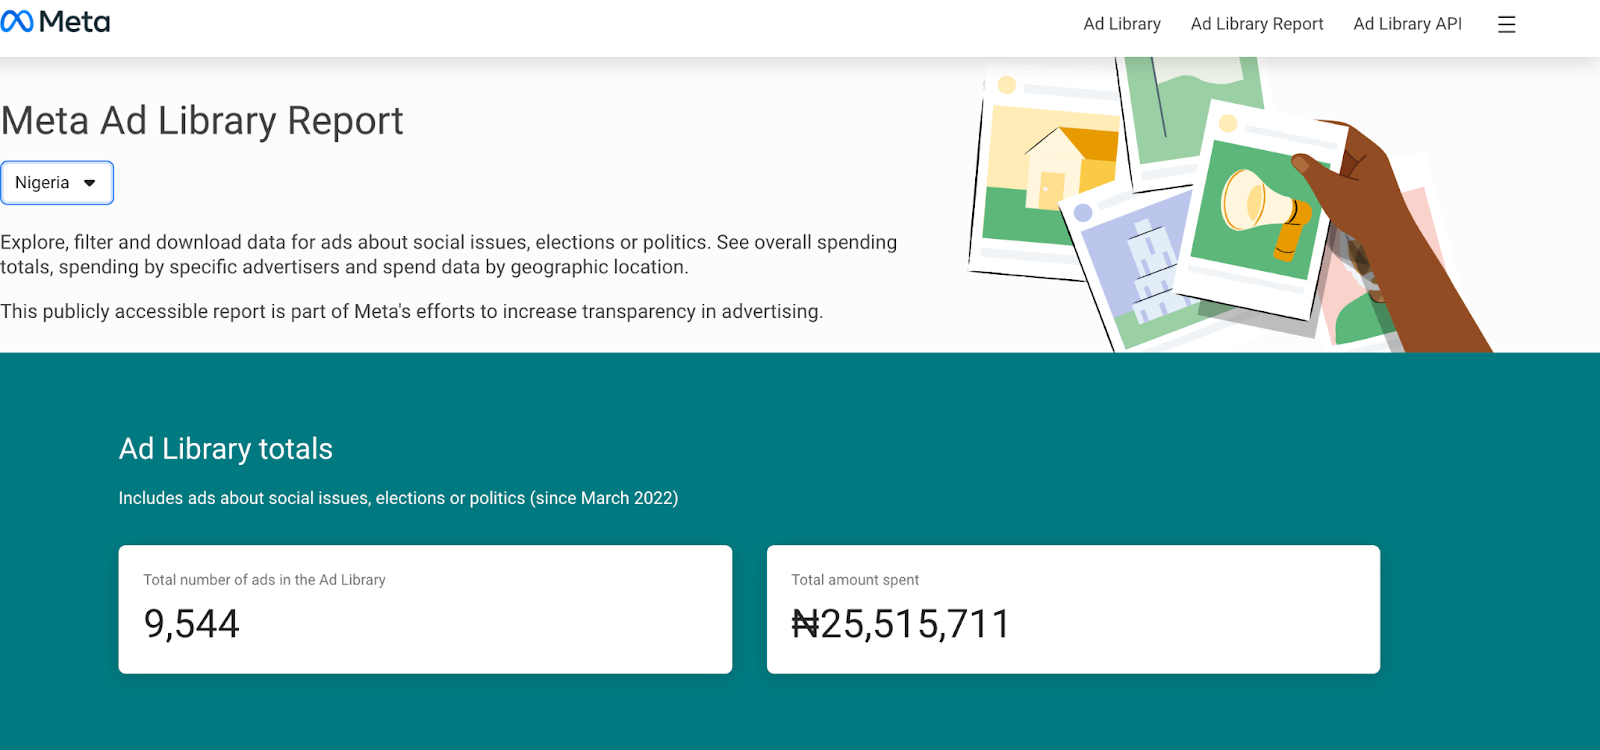 Running Digital: Online Political Advertising and Nigeria’s 2023 General Elections